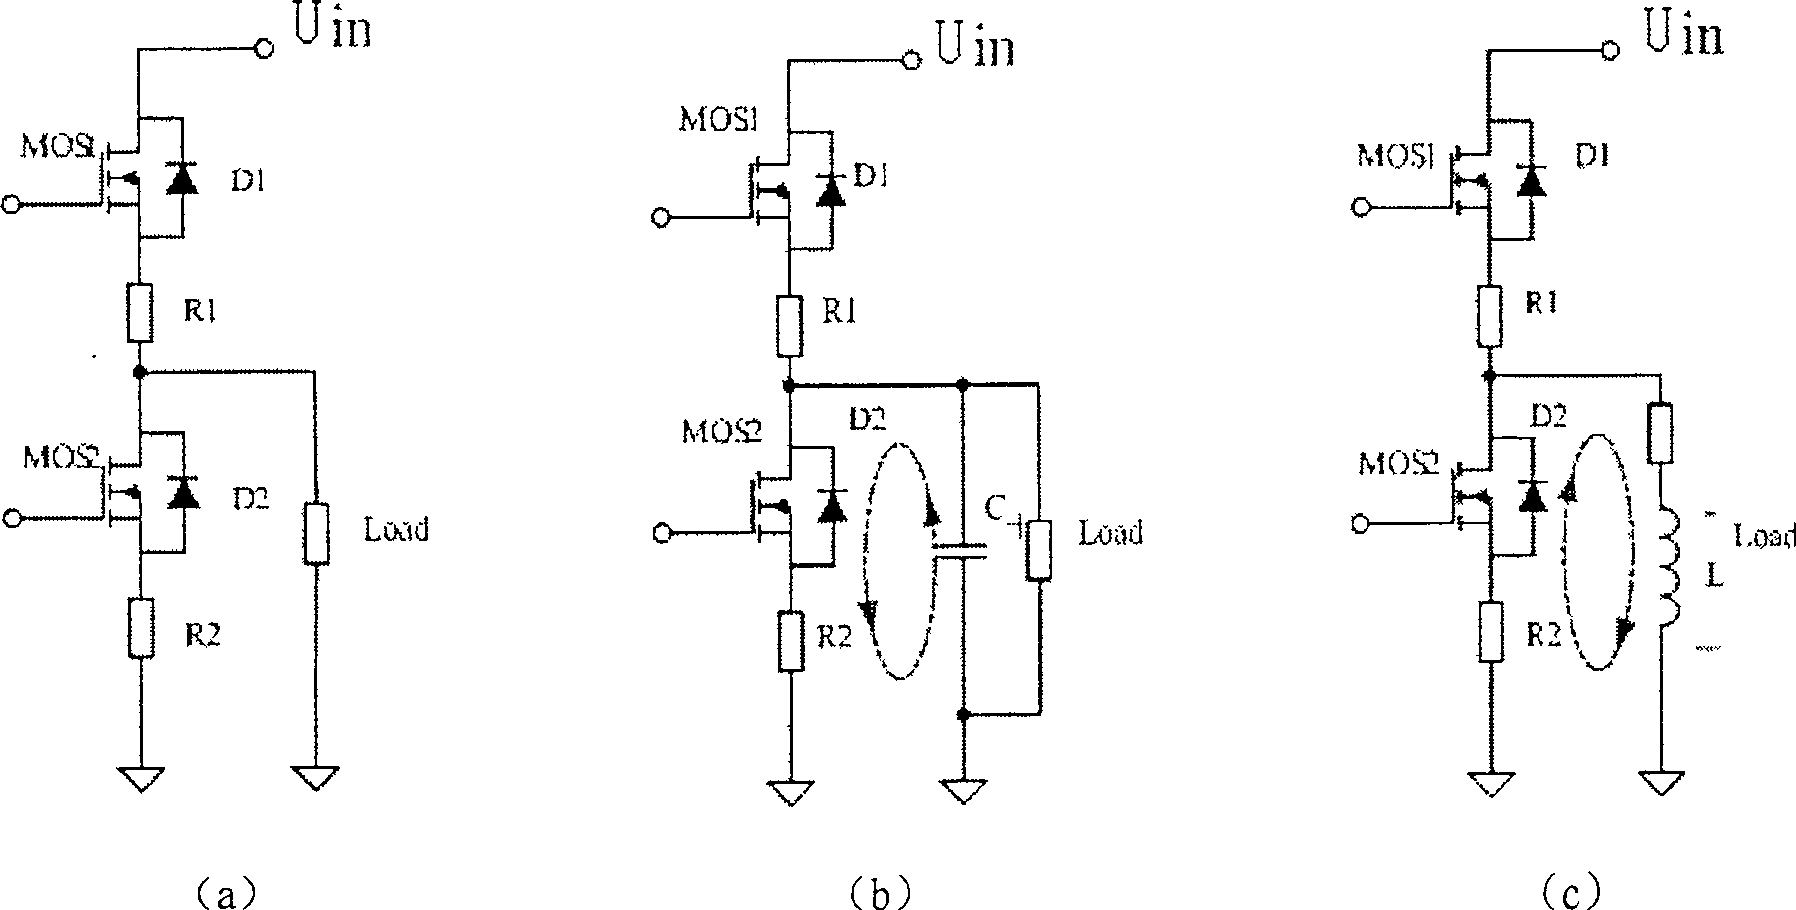 DC solid-state power switch circuit